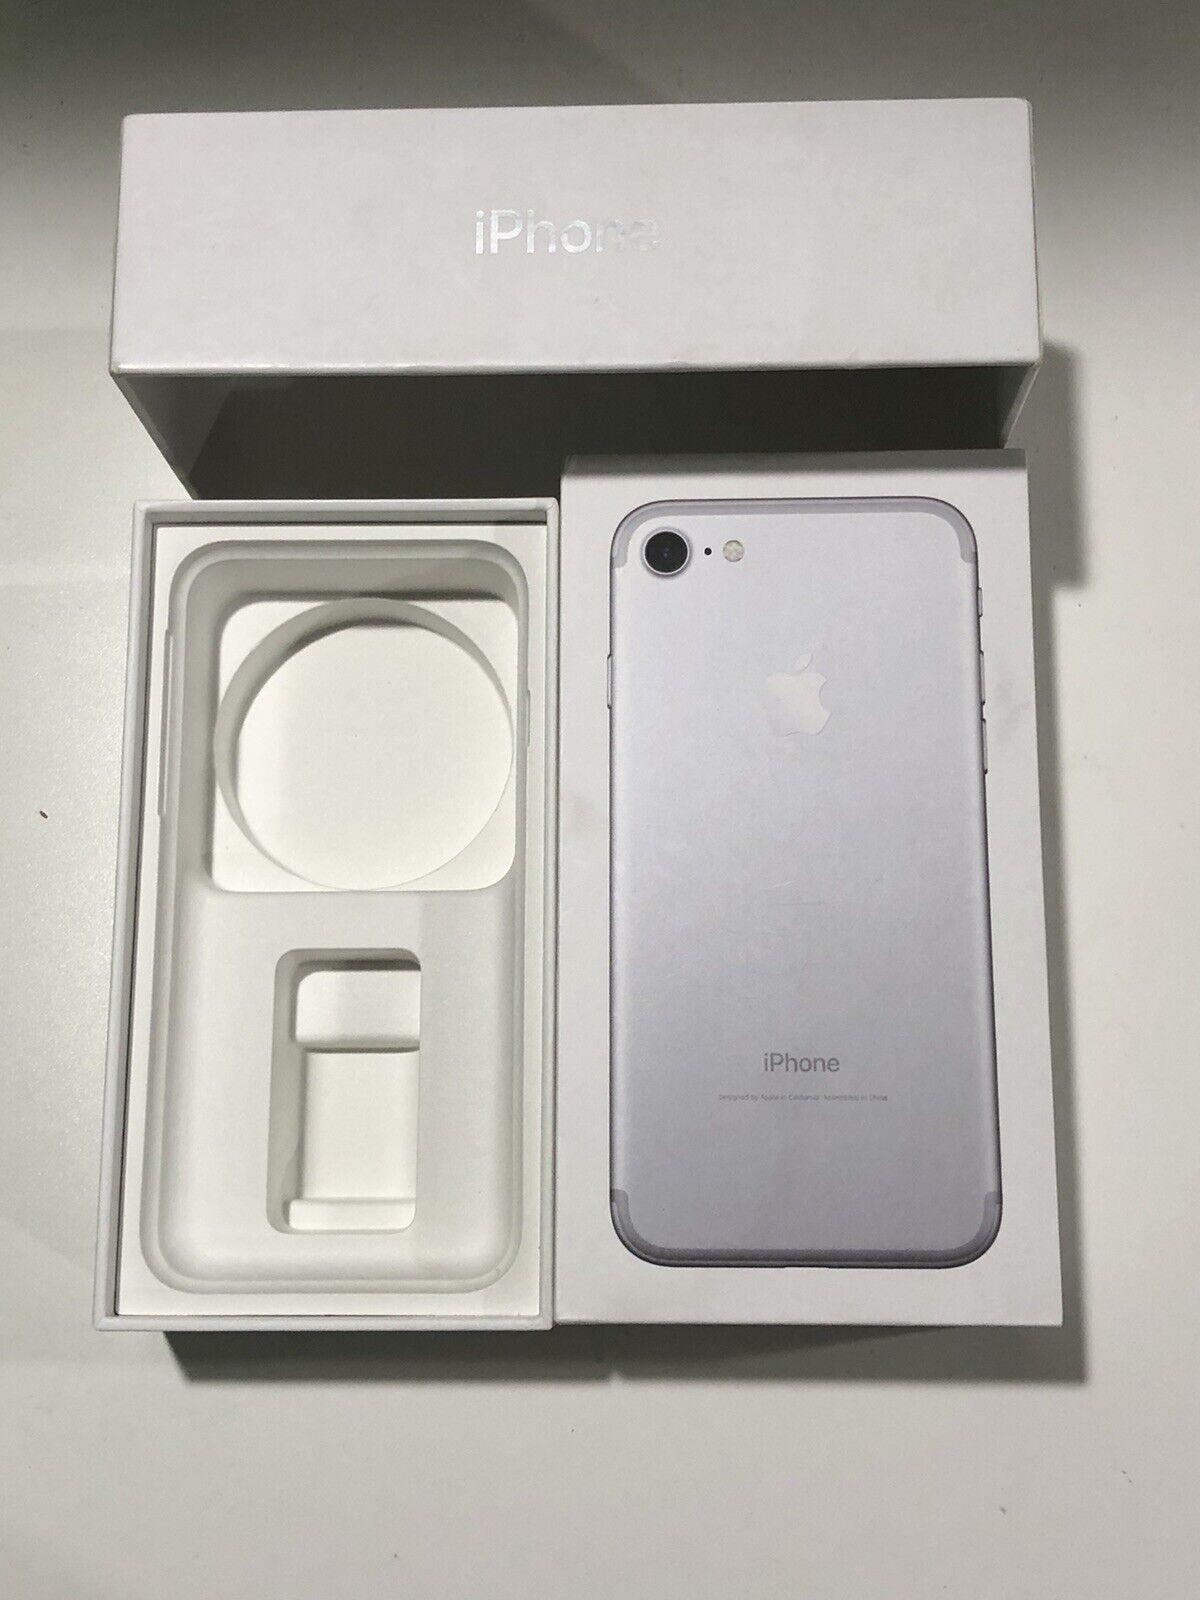 Lot of 2 iPhone 7 Boxes ONLY, Silver Color Apple